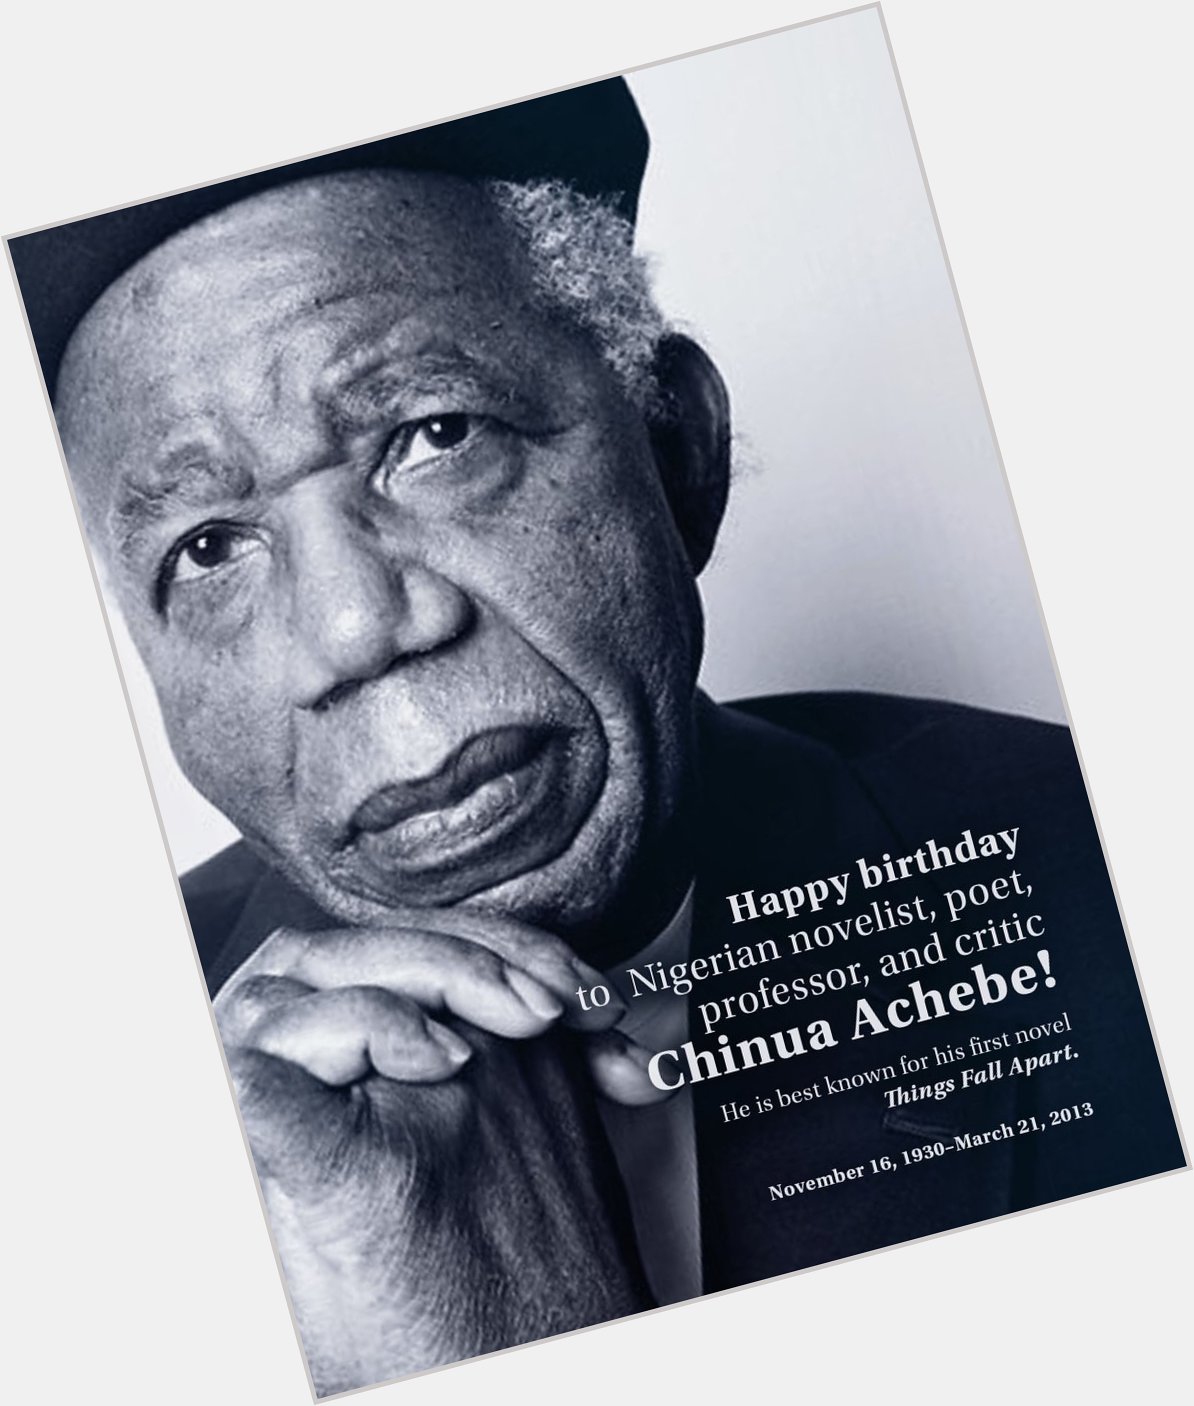 Happy birthday to Chinua Achebe, the Nigerian novelist famous for \Things Fall Apart.\ 